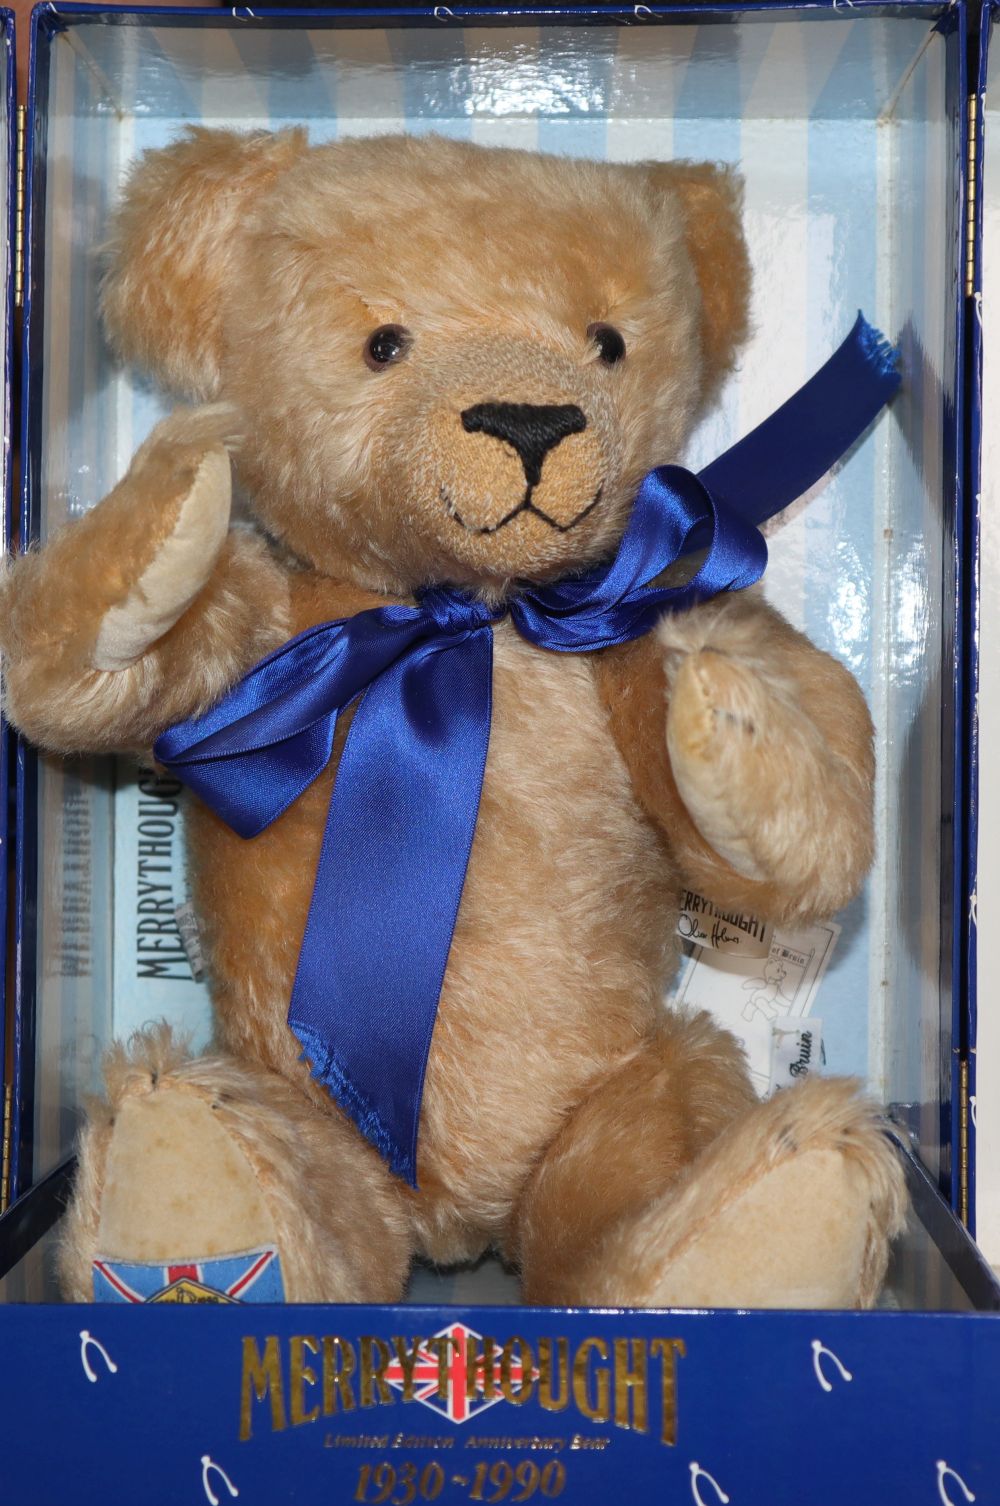 A Merrythought limited edition anniversary bear, boxed with certificate